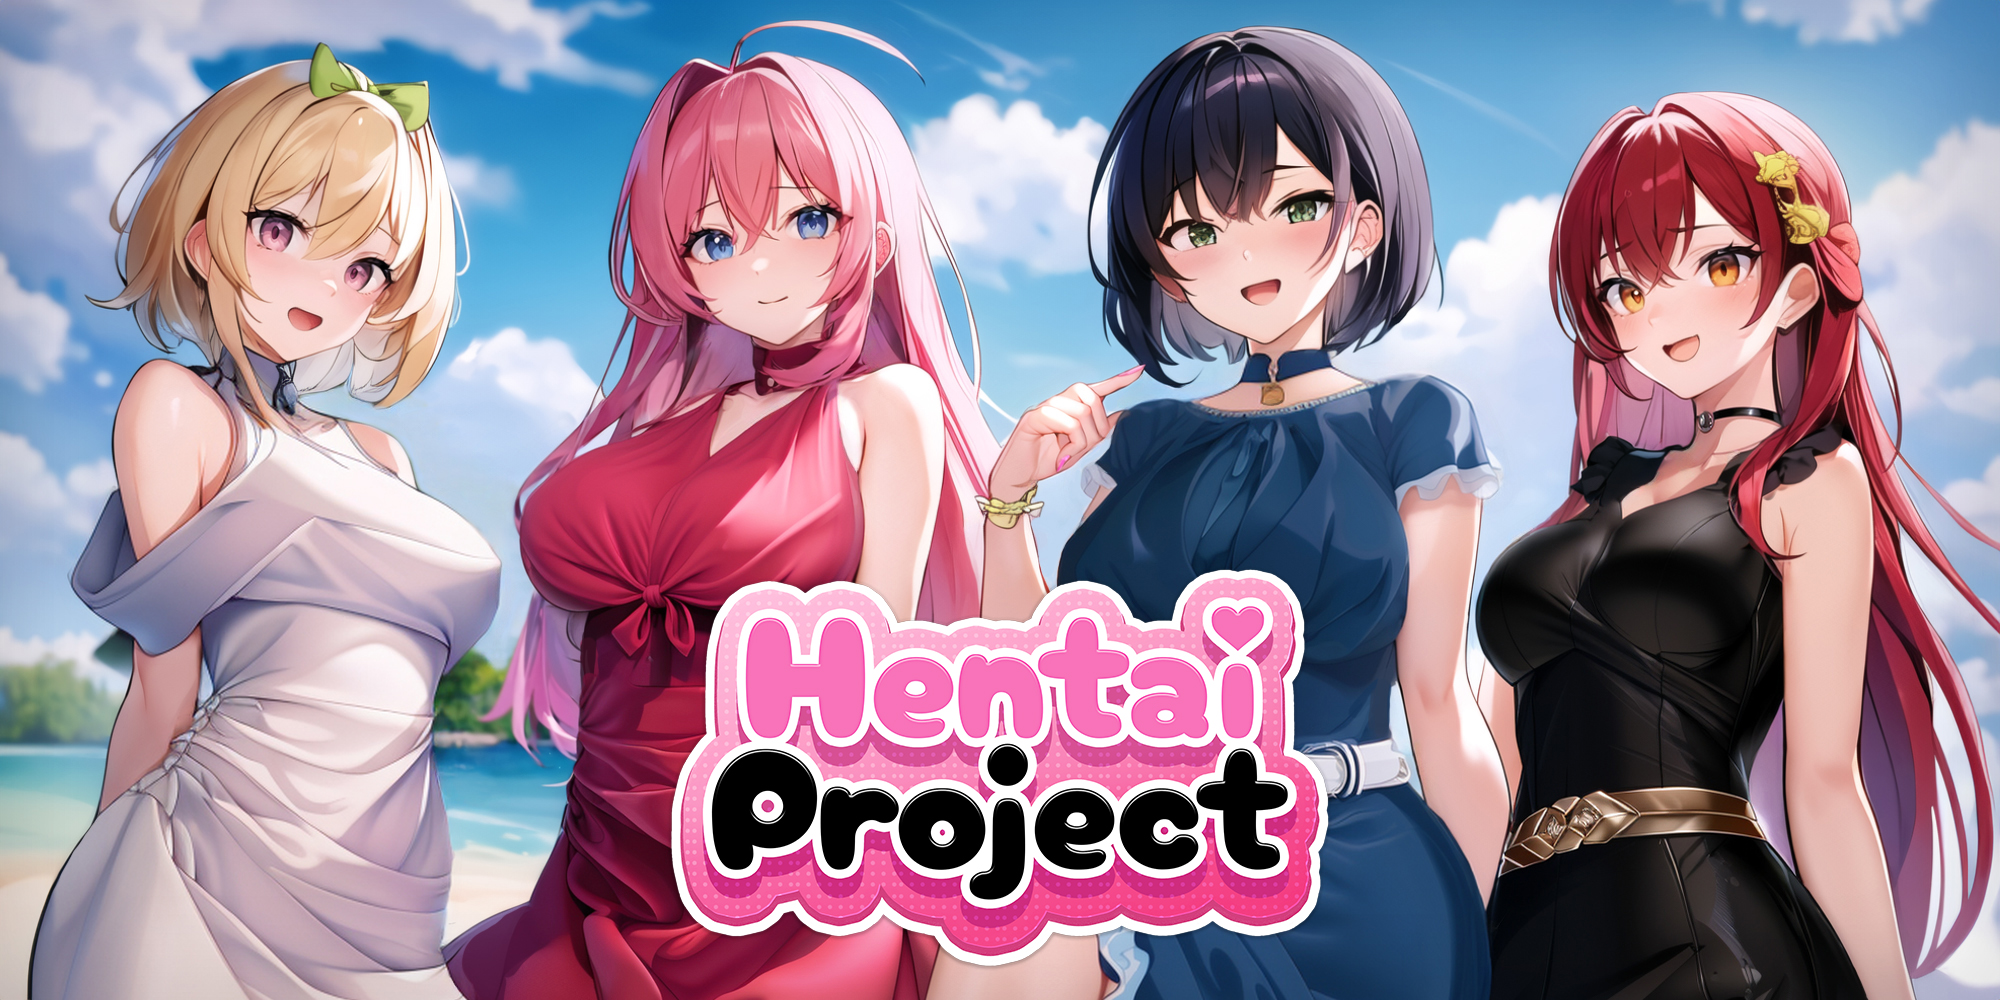 Hentai Project Nintendo Switch download software Games Nintendo